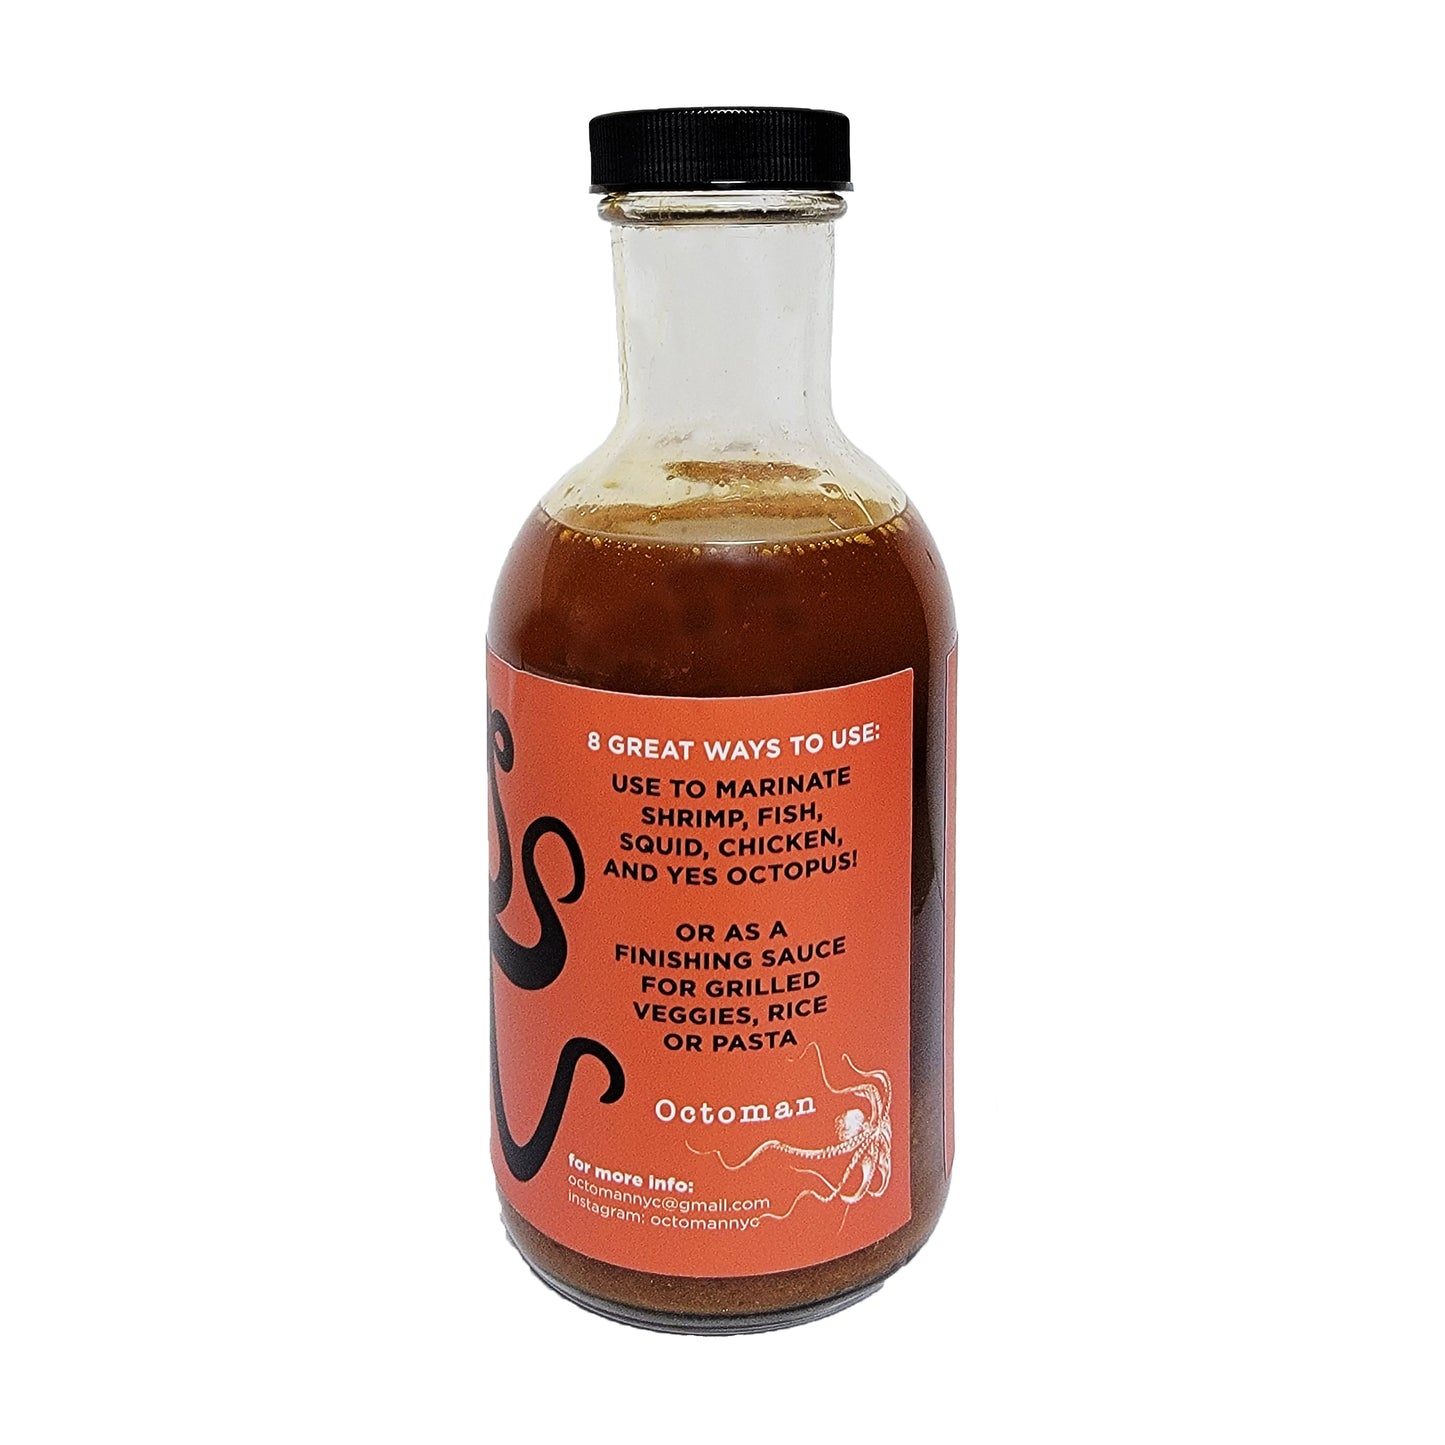 Super Tasty Seafood Marinade by Octoman